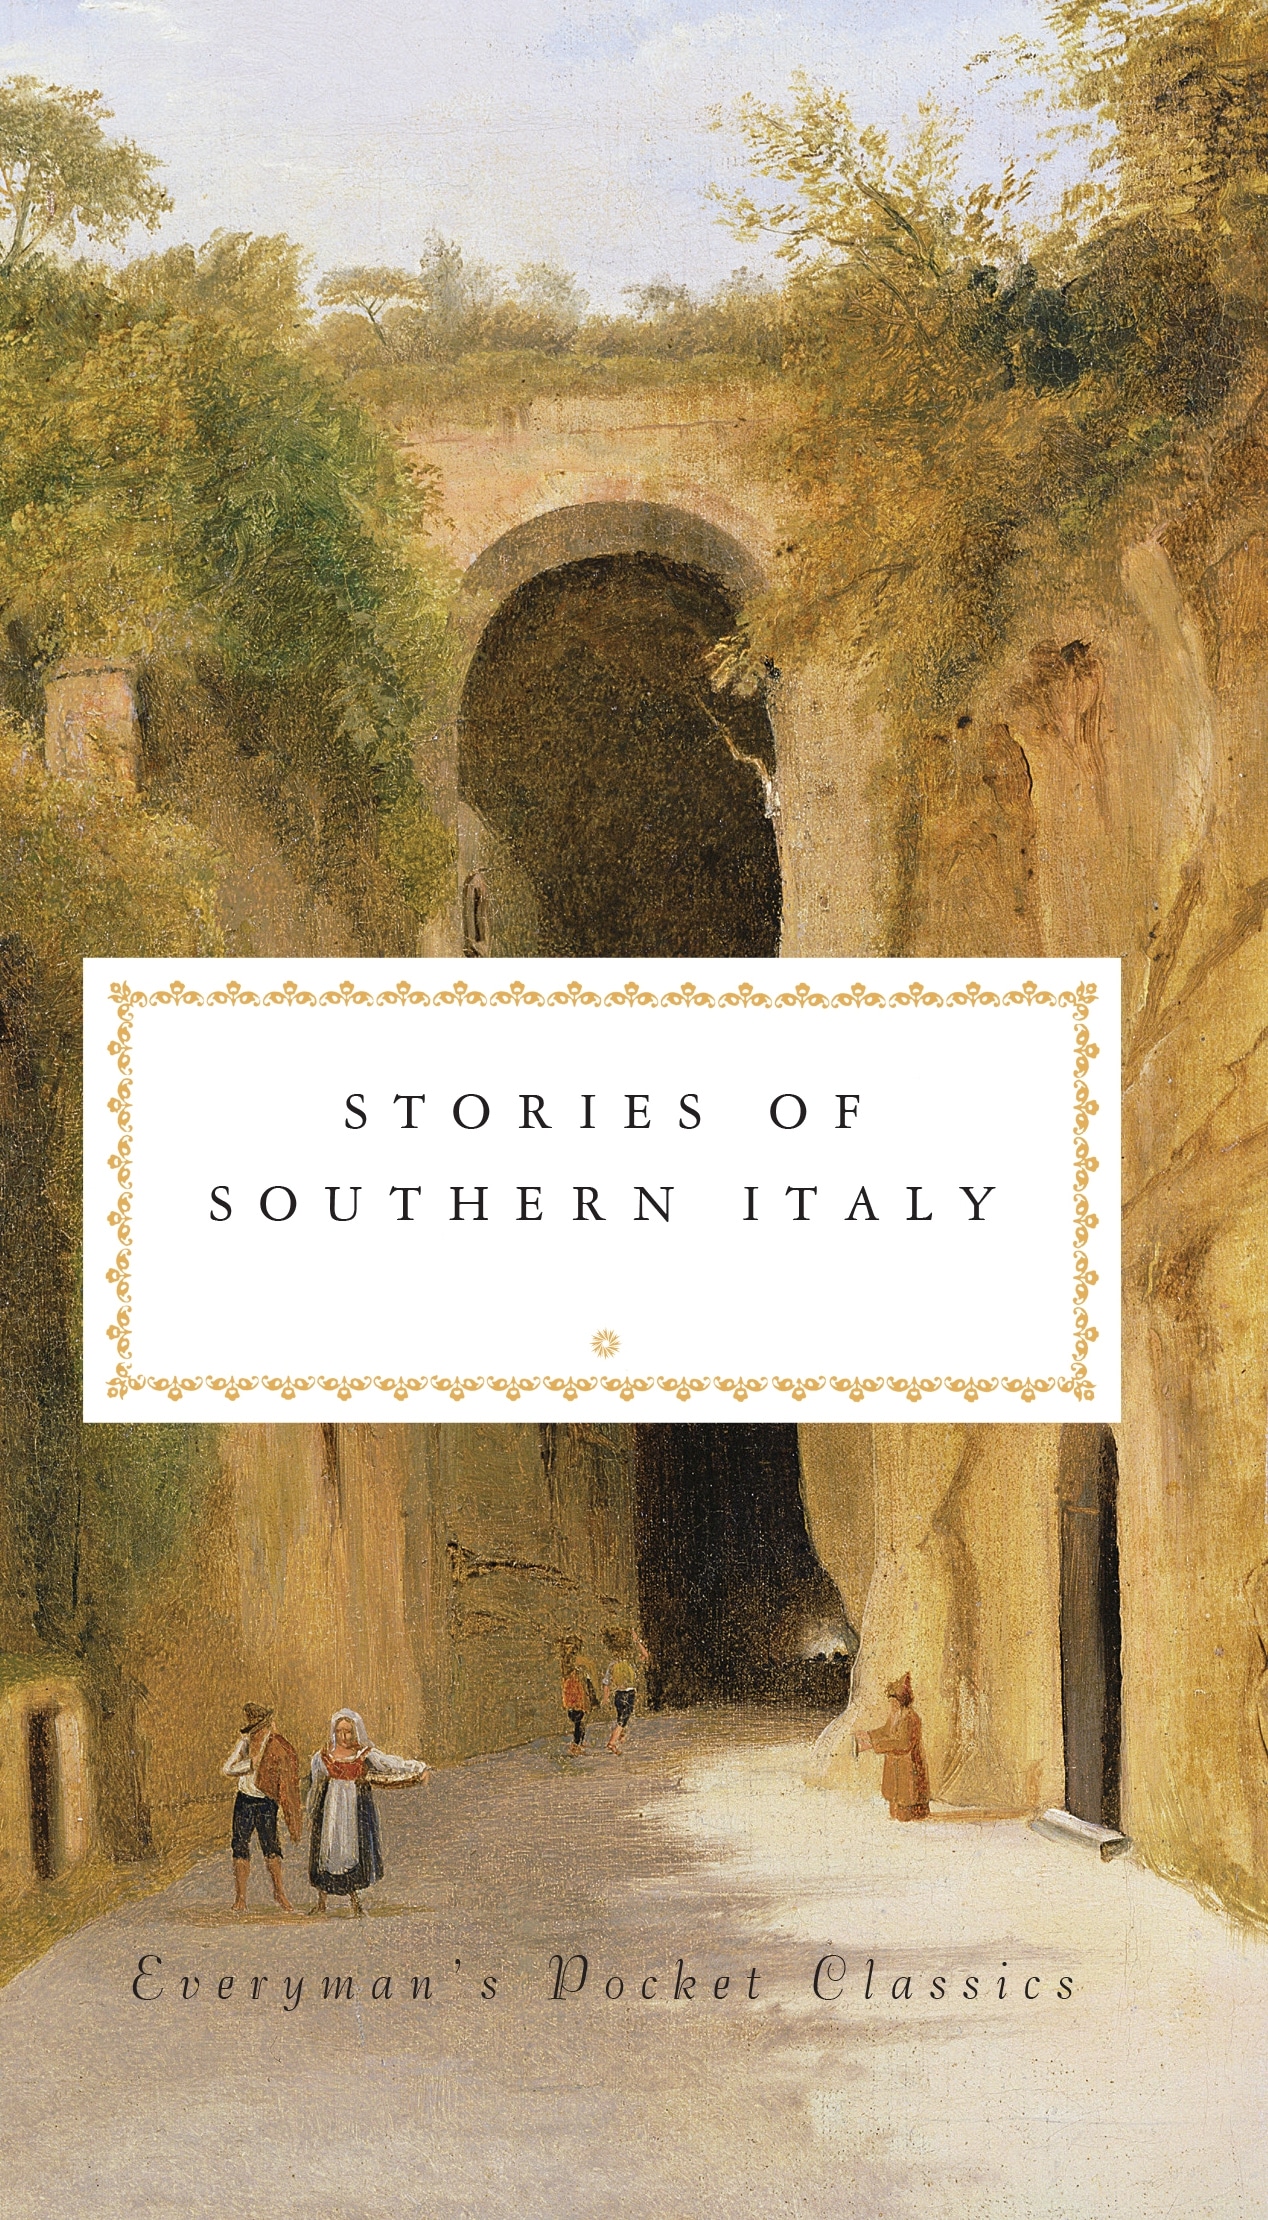 Book “Stories of Southern Italy” by Various, Ella Carr — October 6, 2022